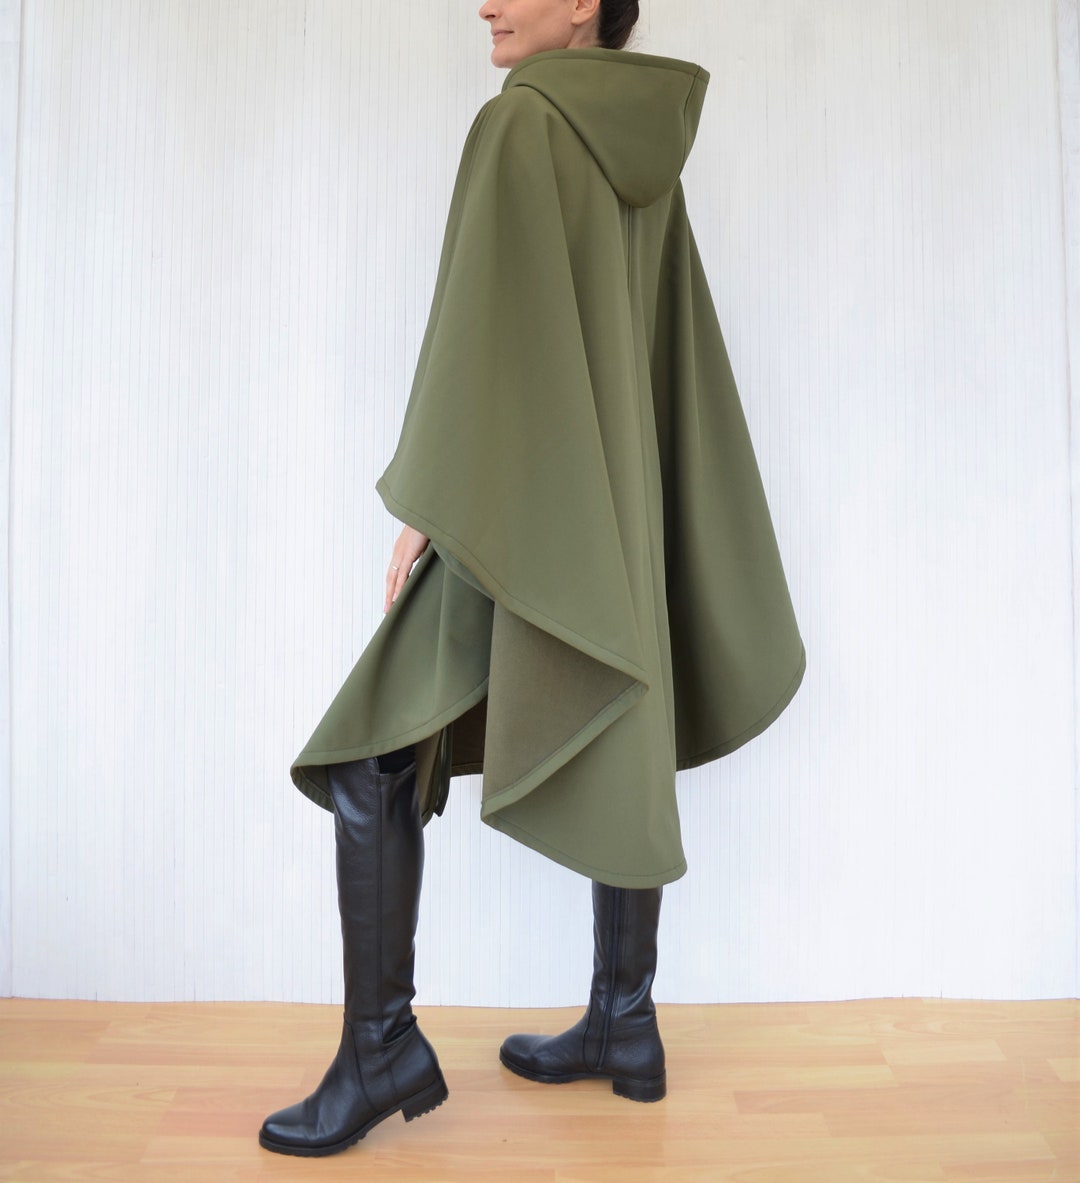 Waterproof and Windproof Cape Coat Green or Black Hooded - Etsy